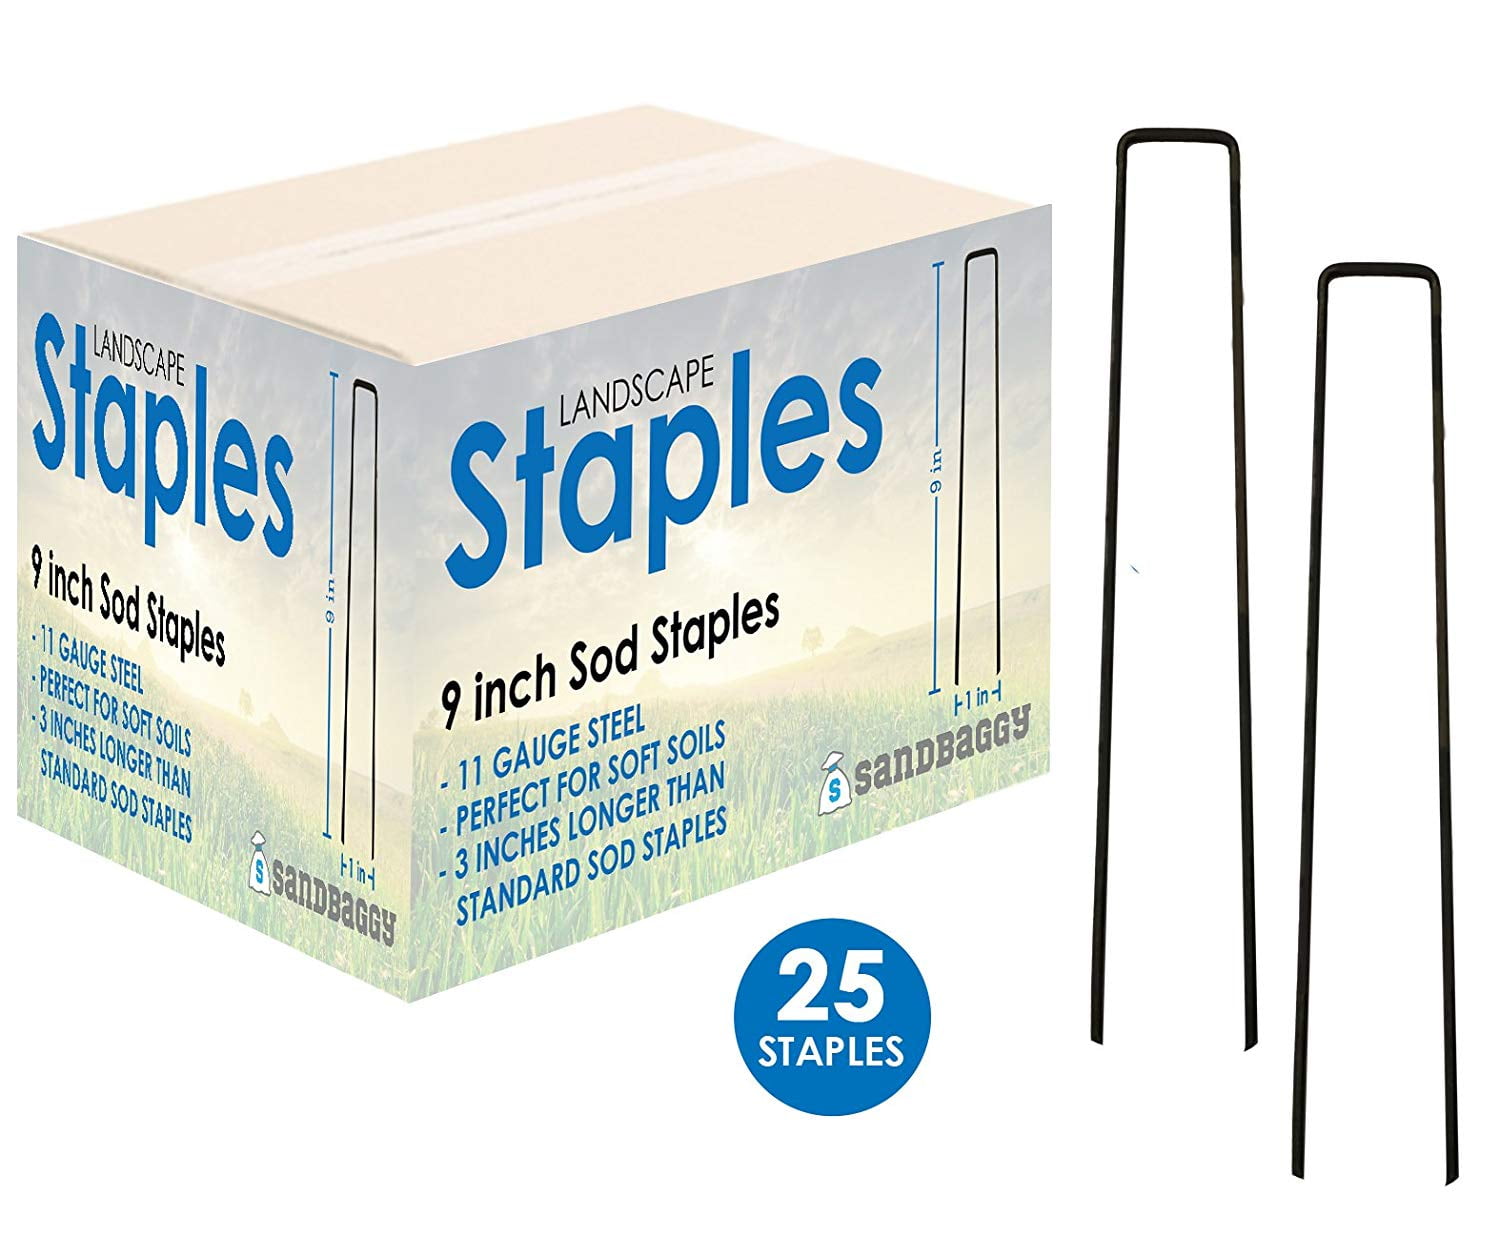 Heavy Duty USA 12 pack of 18" long steel stakes,spikes or pegs 62518HNP12 